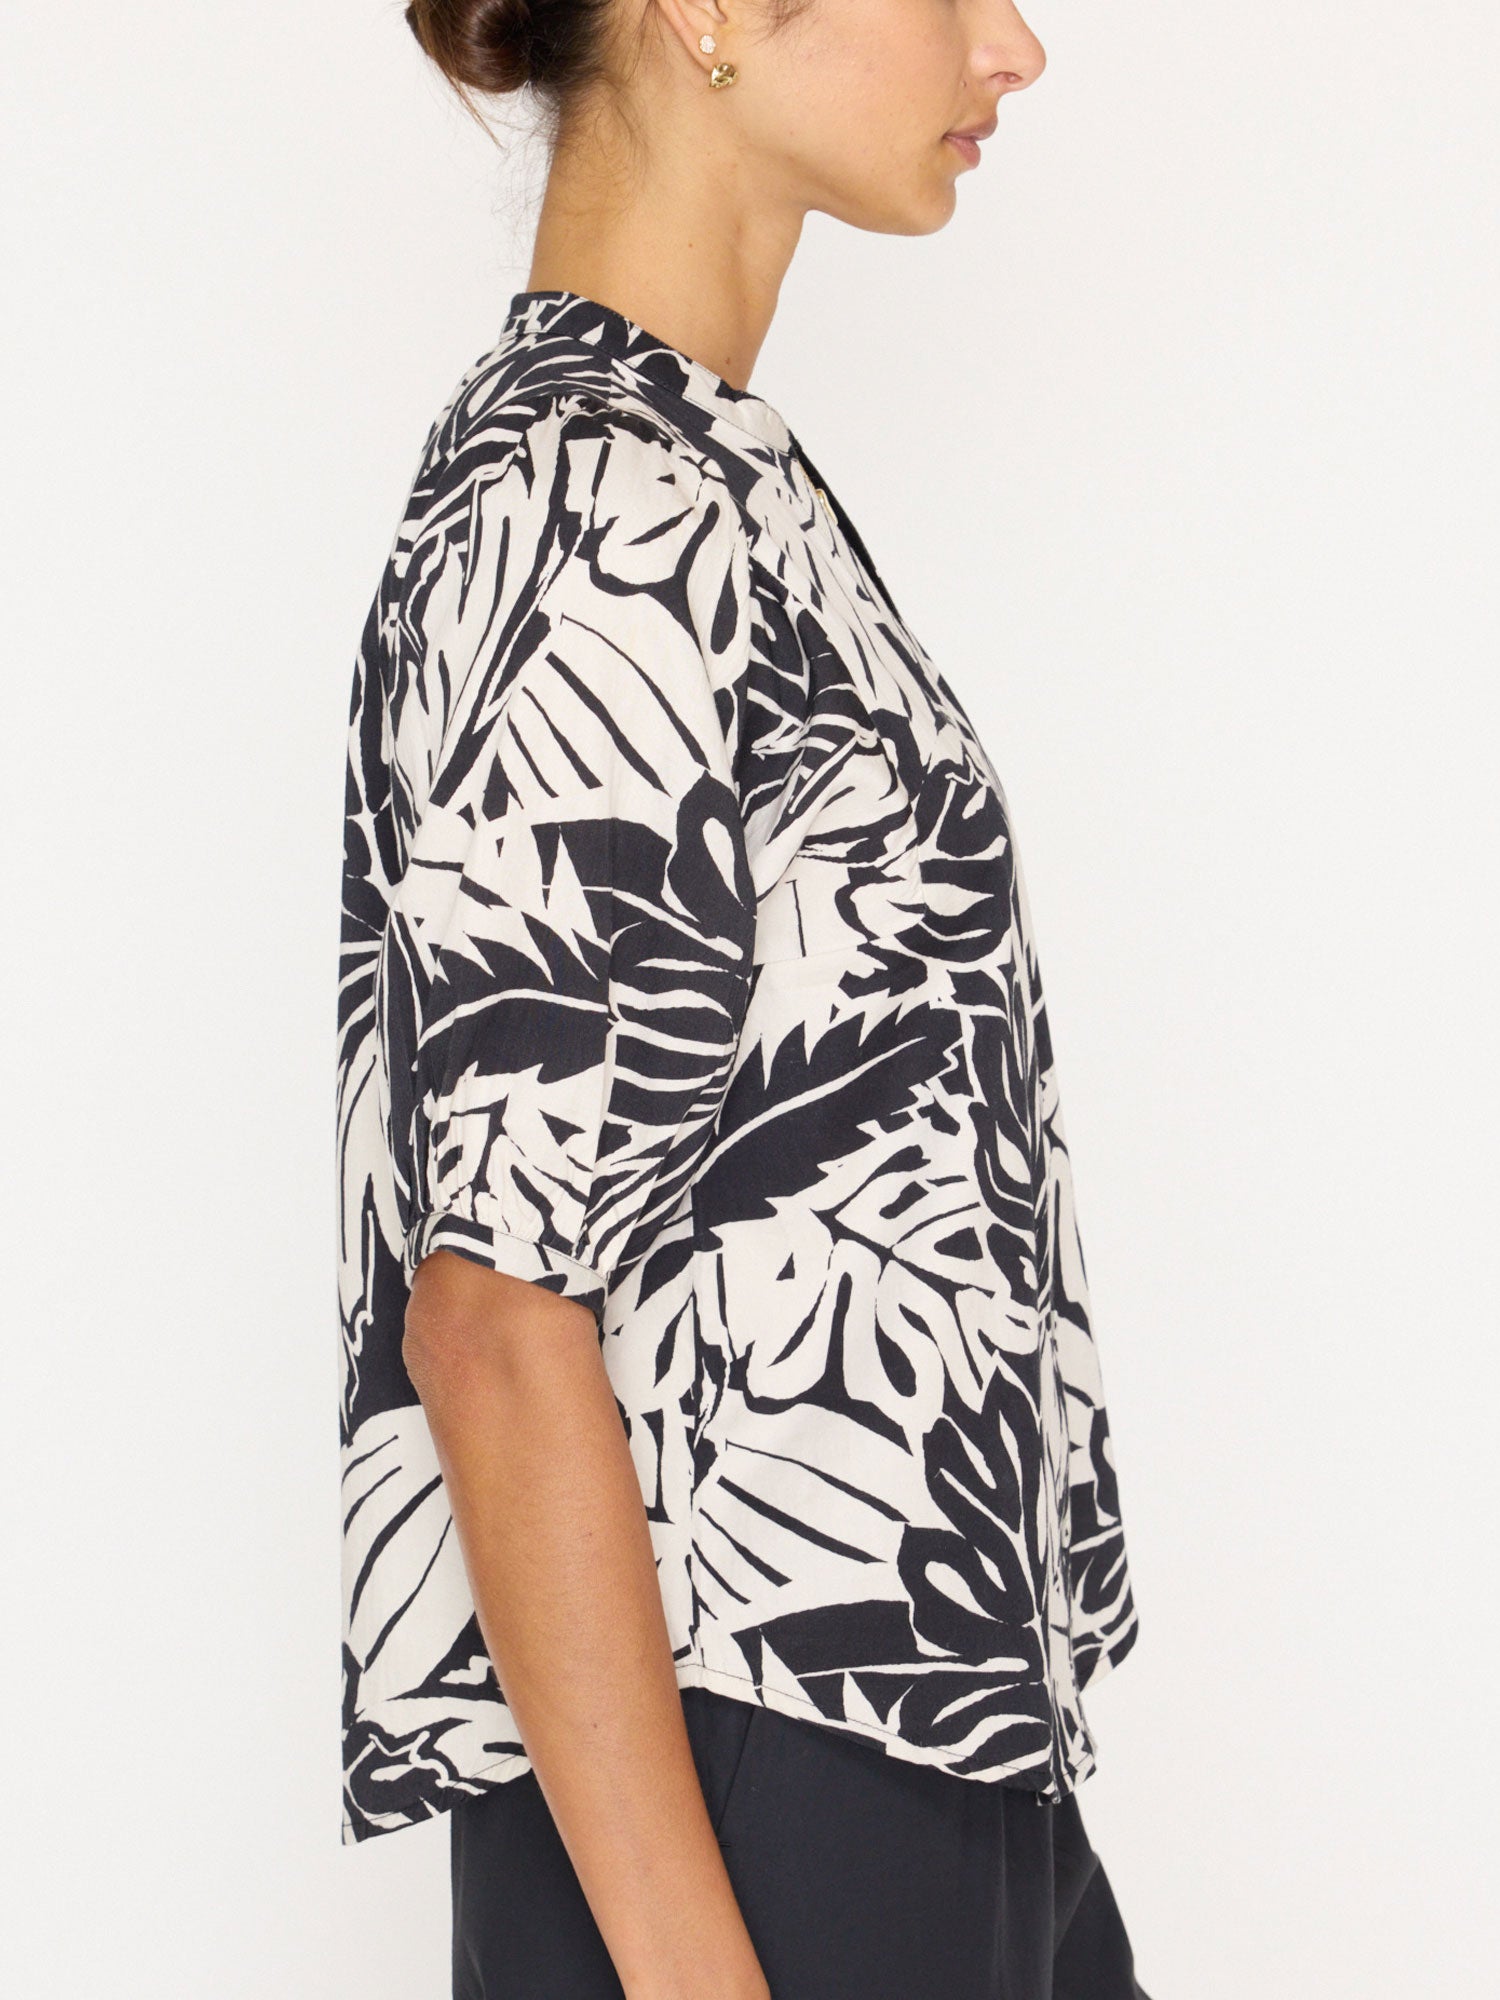 Asteria black and white printed blouse side view 2